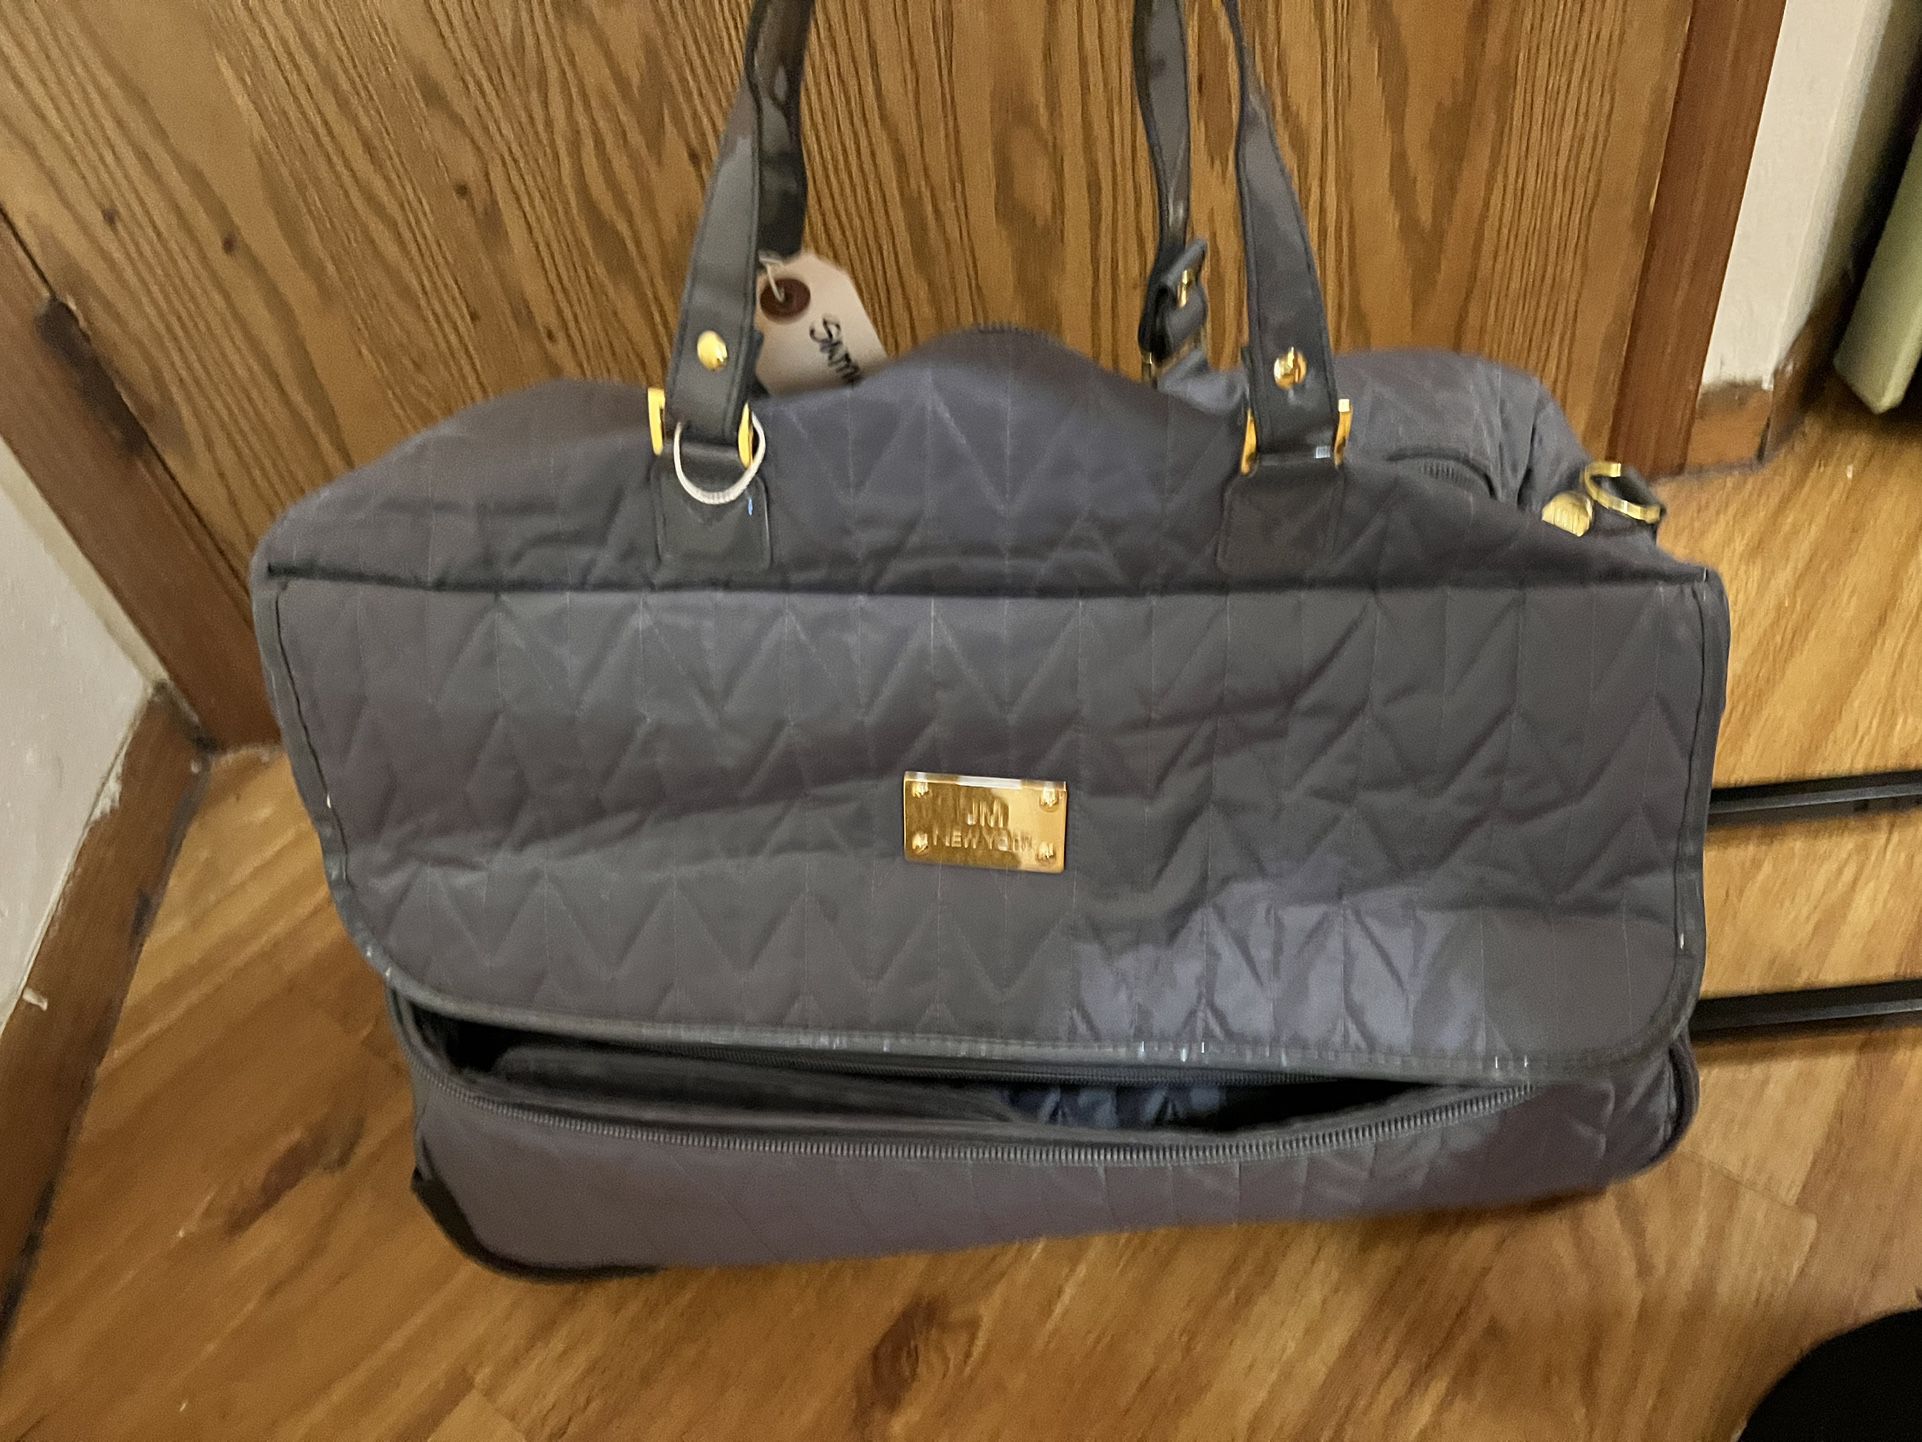 Auth Louis Vuitton Damier Geant Souverain Carryall Boston luggage travel  Bag for Sale in Arlington, TX - OfferUp